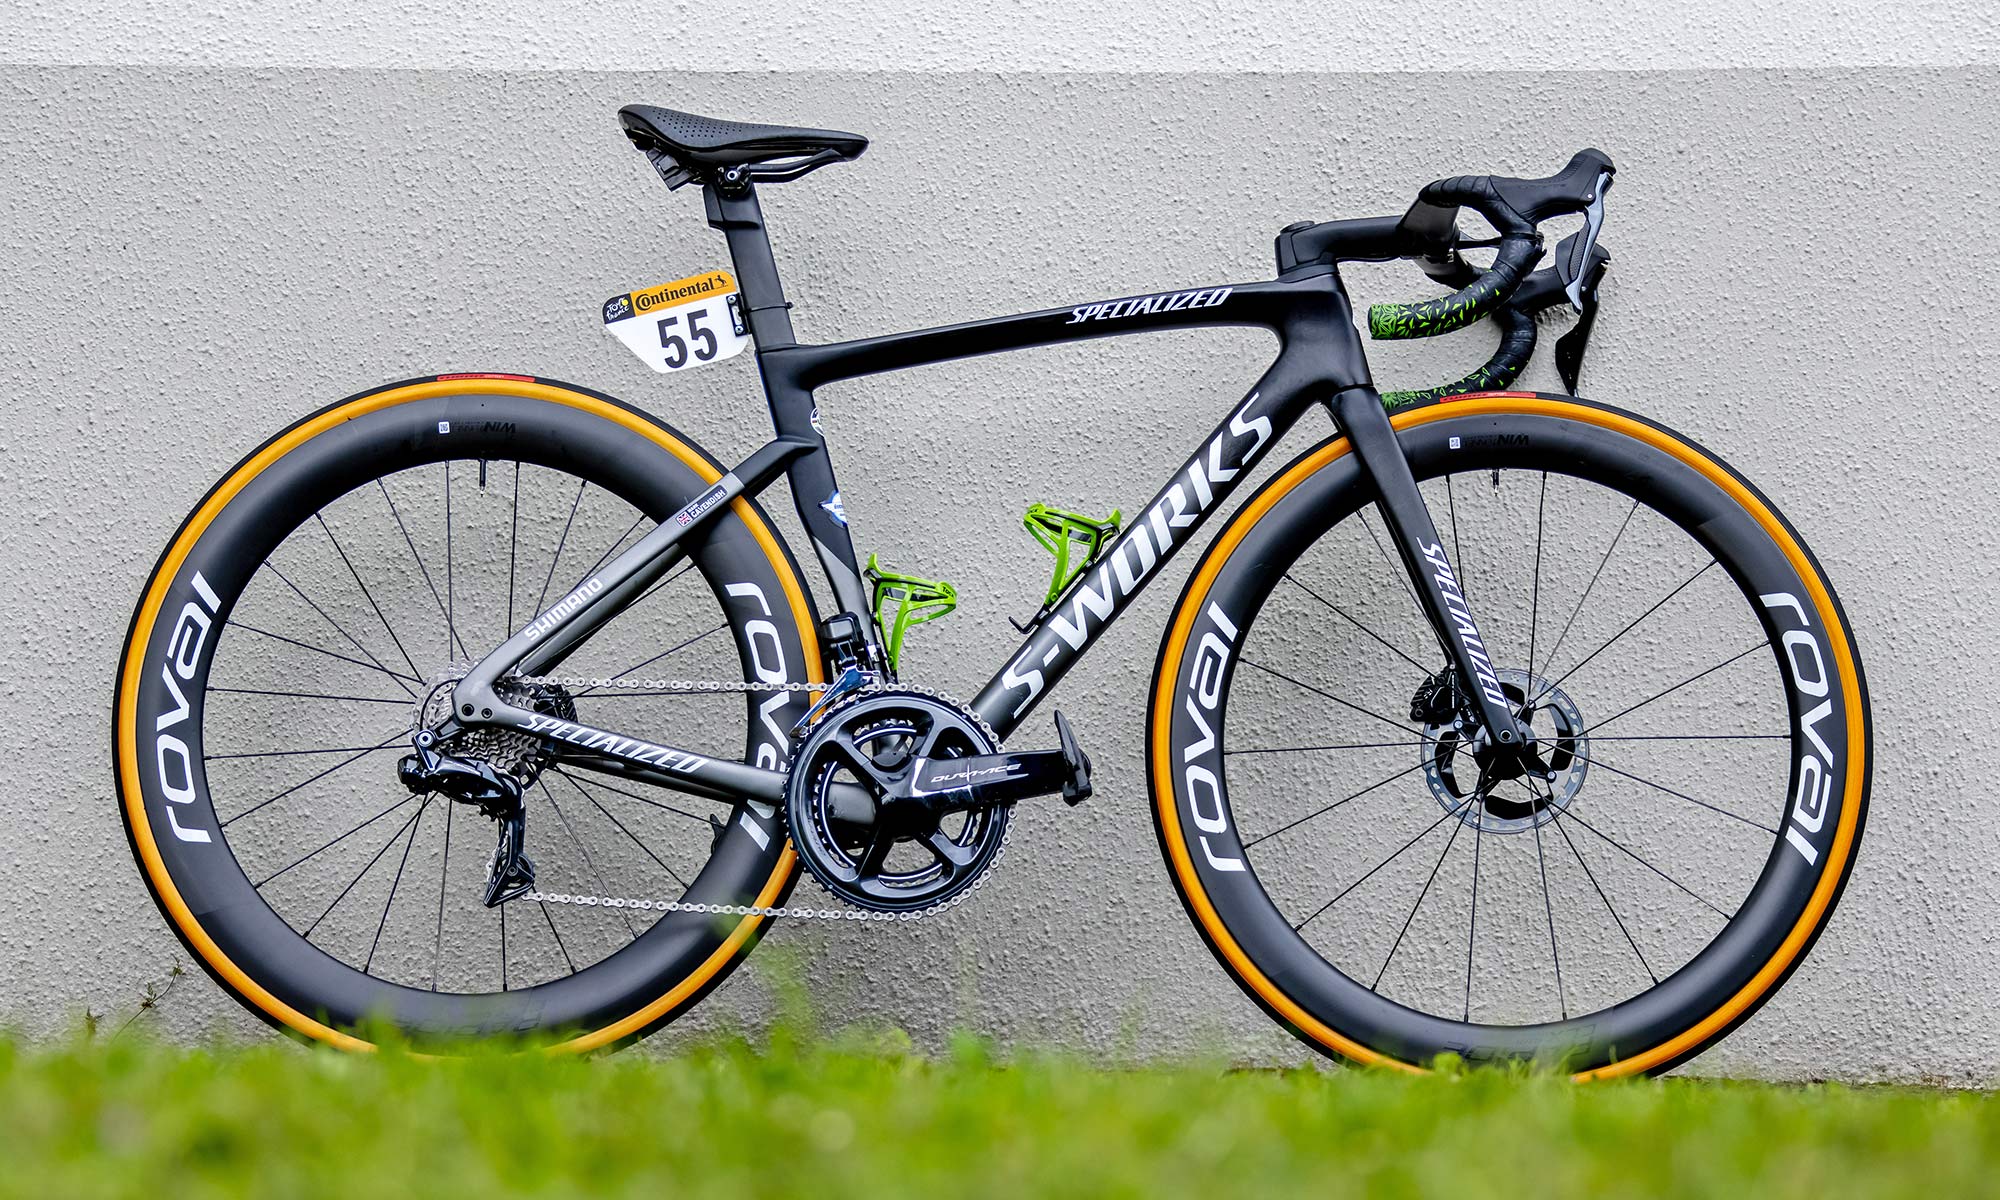 2021 Mark Cavendish 3x Tour de France stage winning green sprinter jersey Specialized S-Works Tarmac SL7, photo by Wout Beel